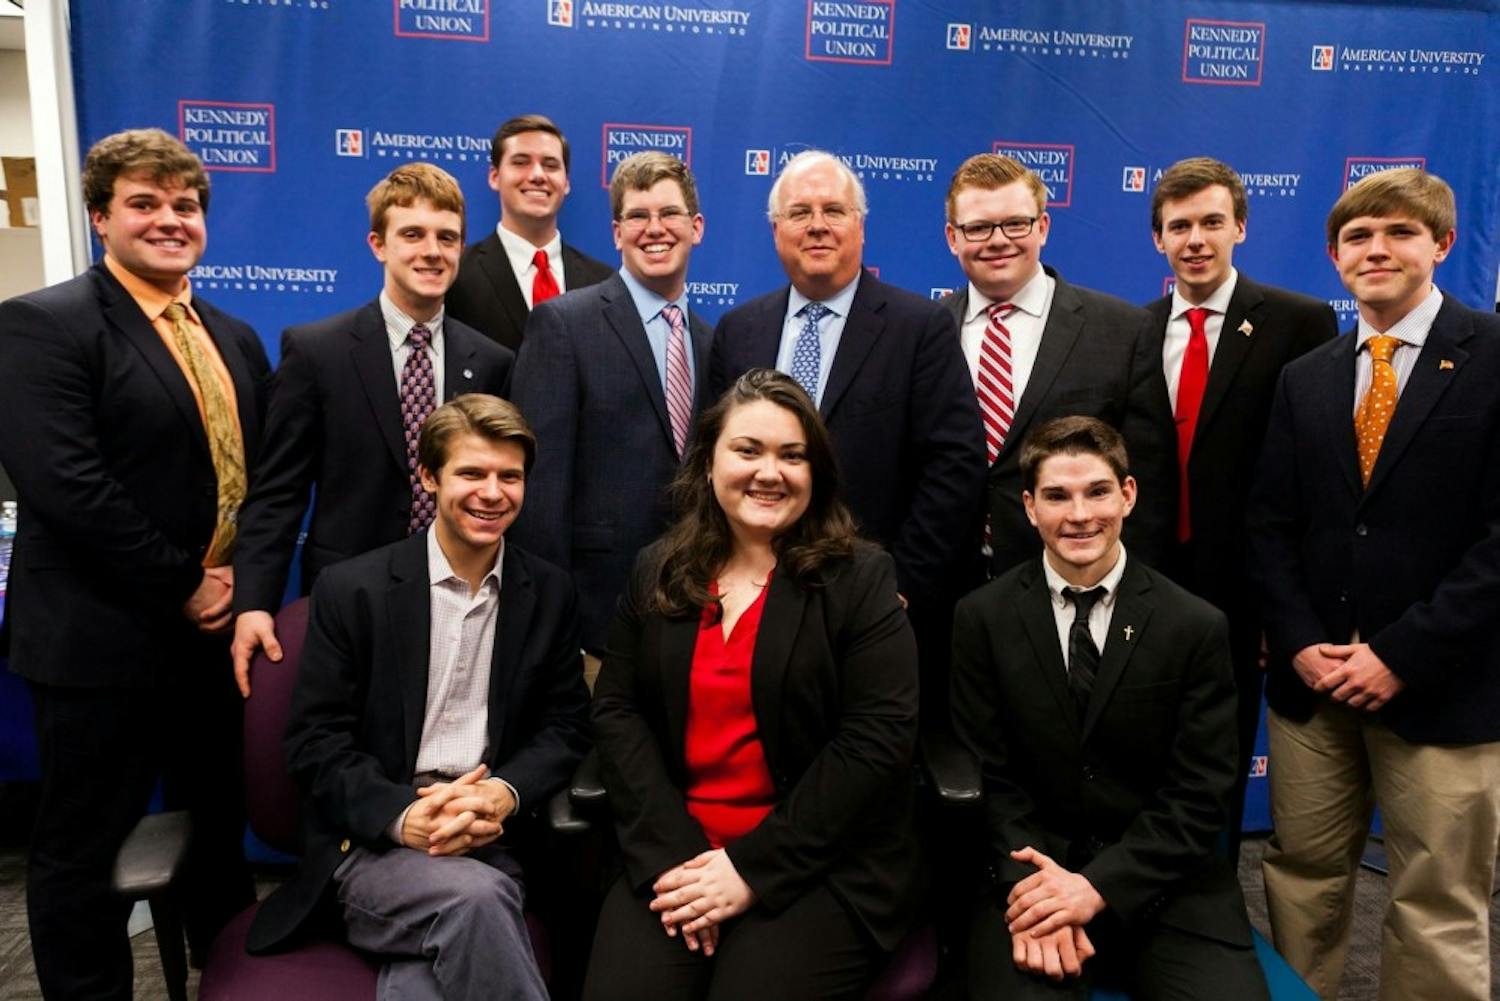 The AU College Republicans pose with Karl Rove during his visit to AU on Feb. 16, 2016.&nbsp;